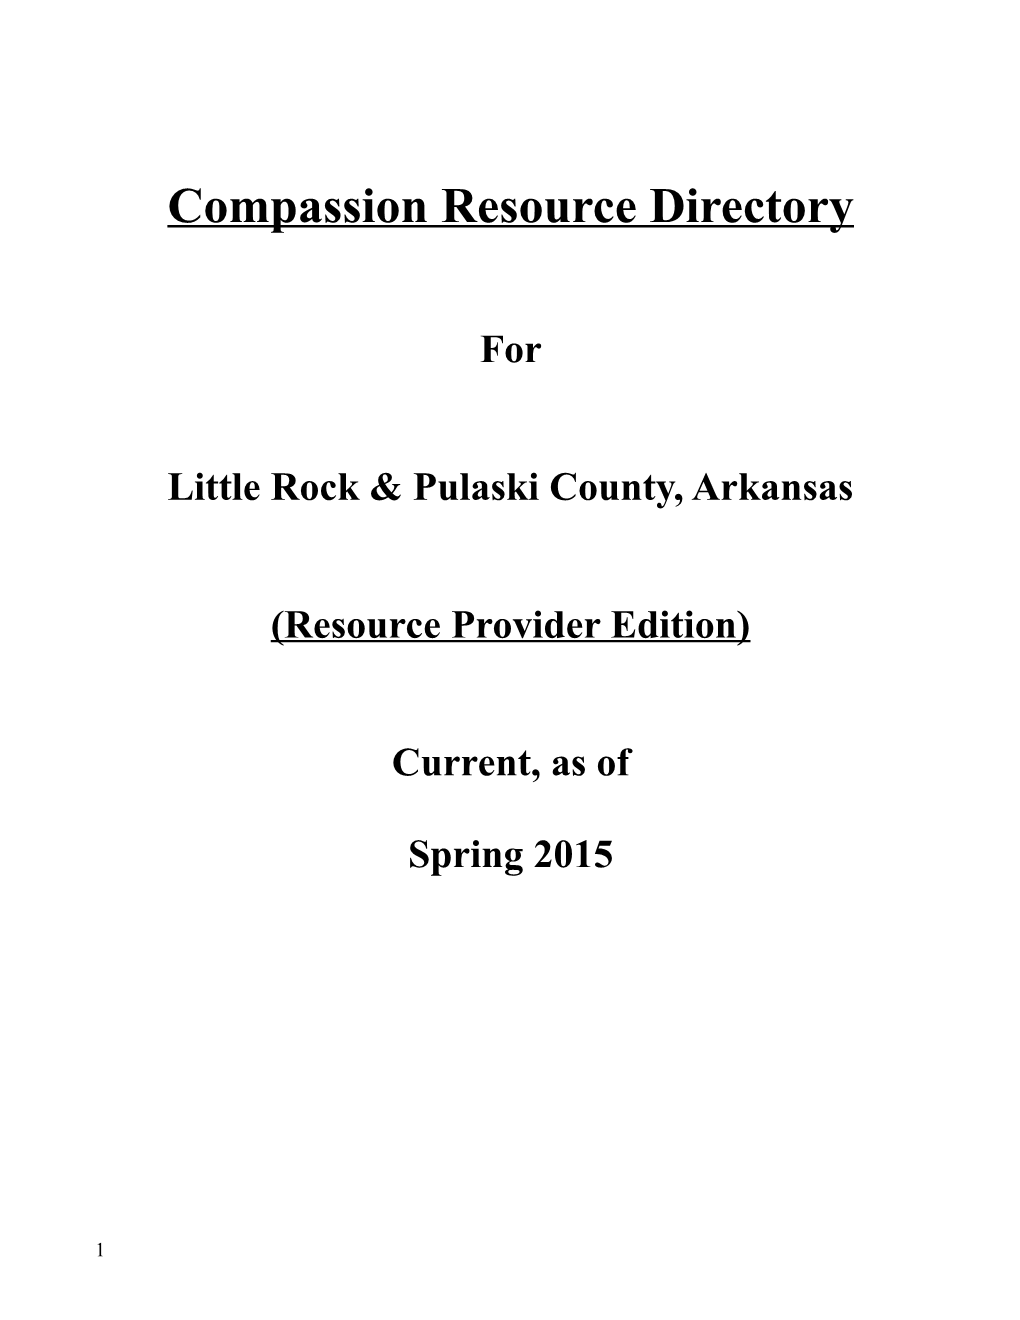 Compassion Resource Directory